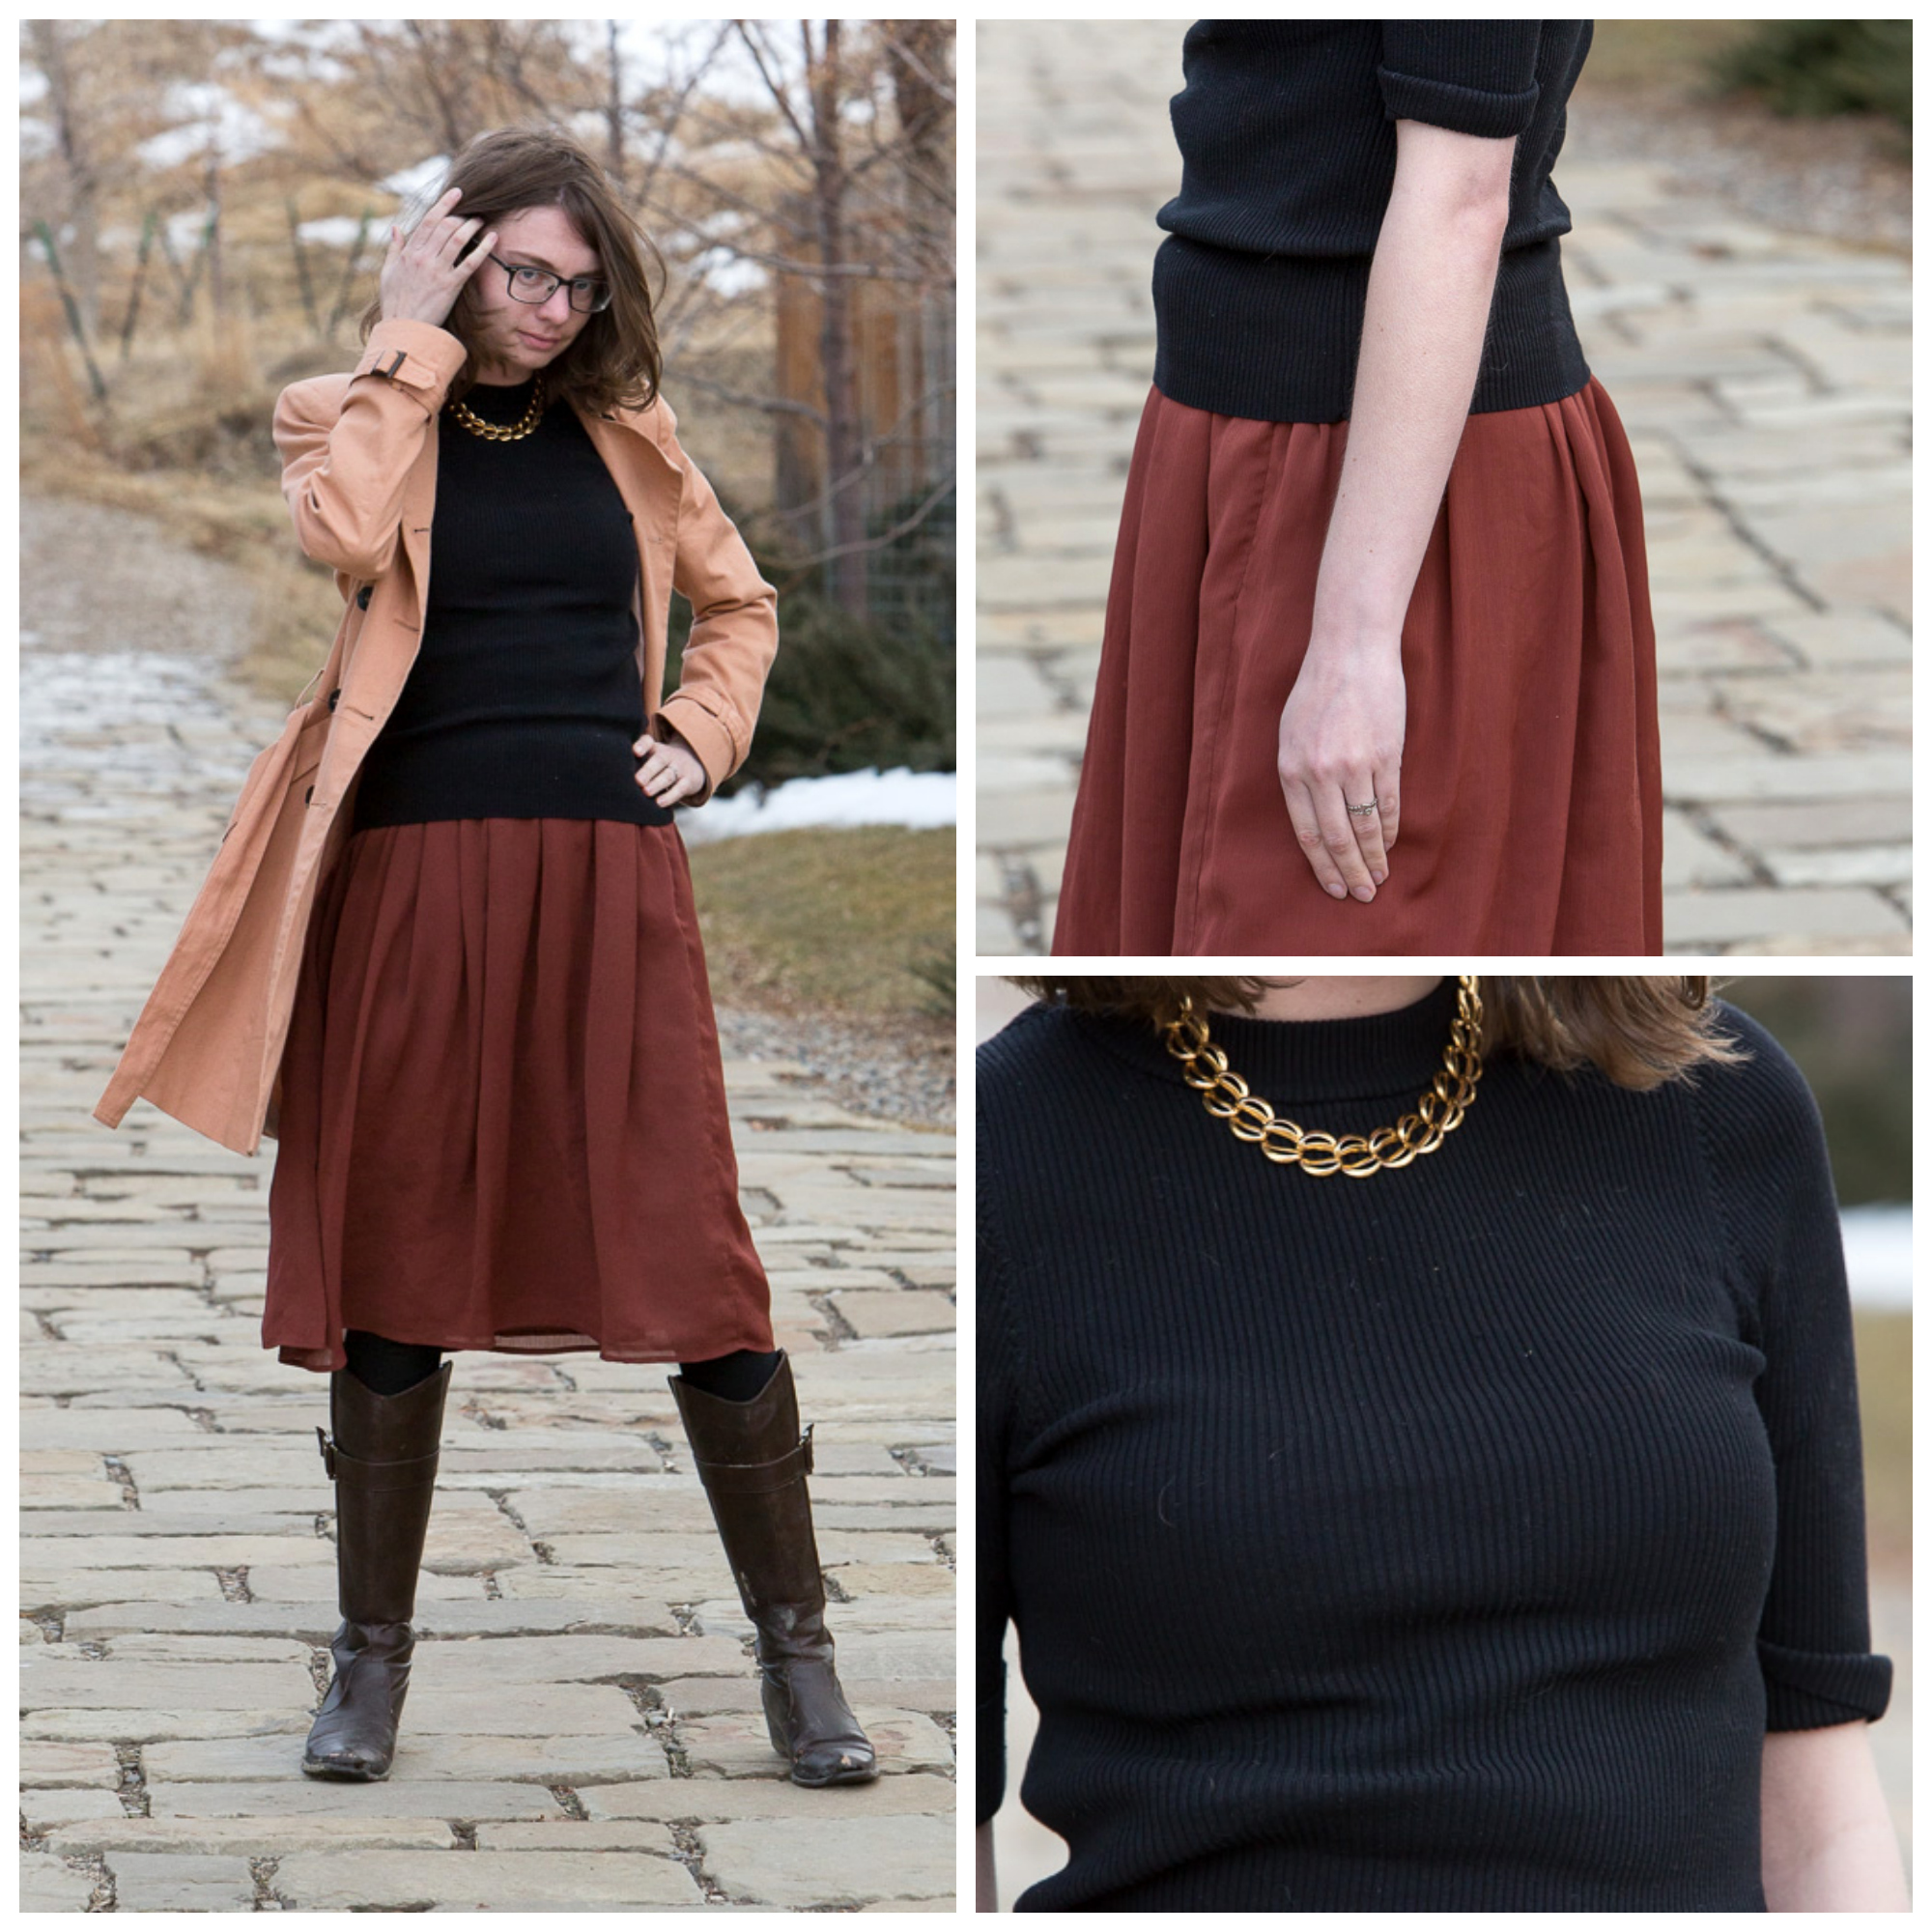 trench coat, brown, black, outfit, skirt, sweater, Never fully dressed, withoutastyle, wyoming, 